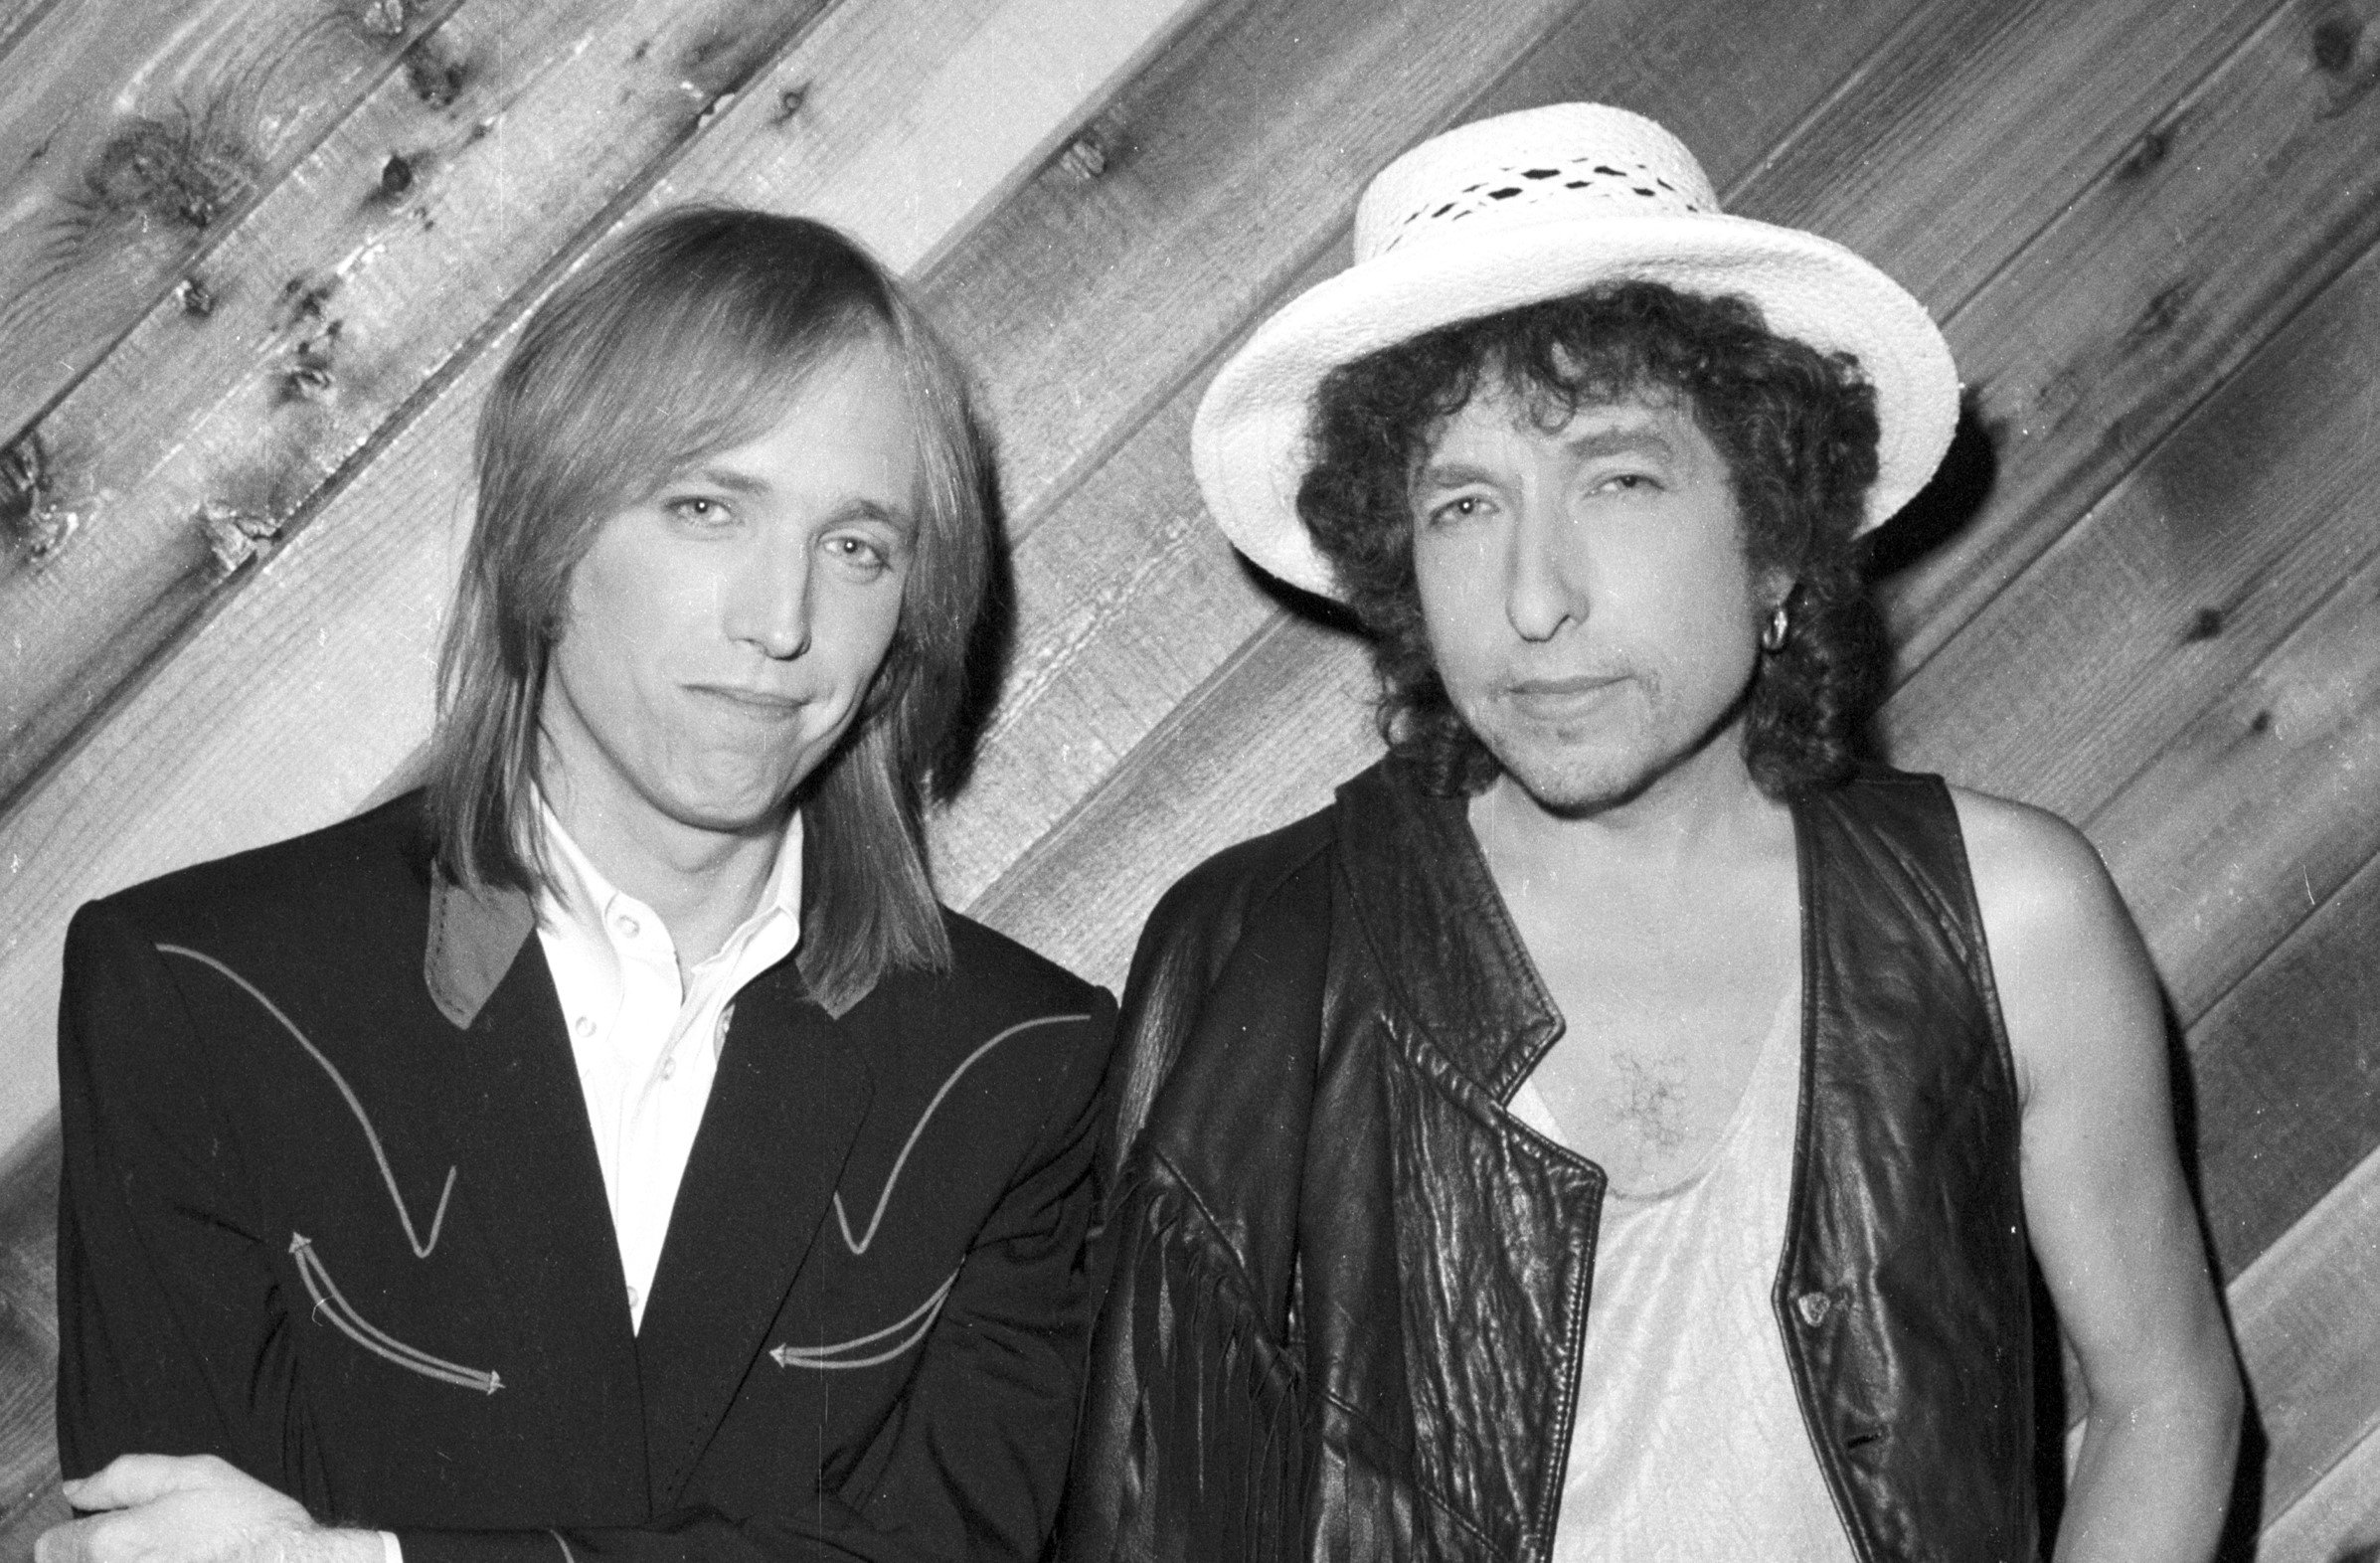 A black and white picture of Tom Petty and Bob Dylan standing against a wood paneled wall.